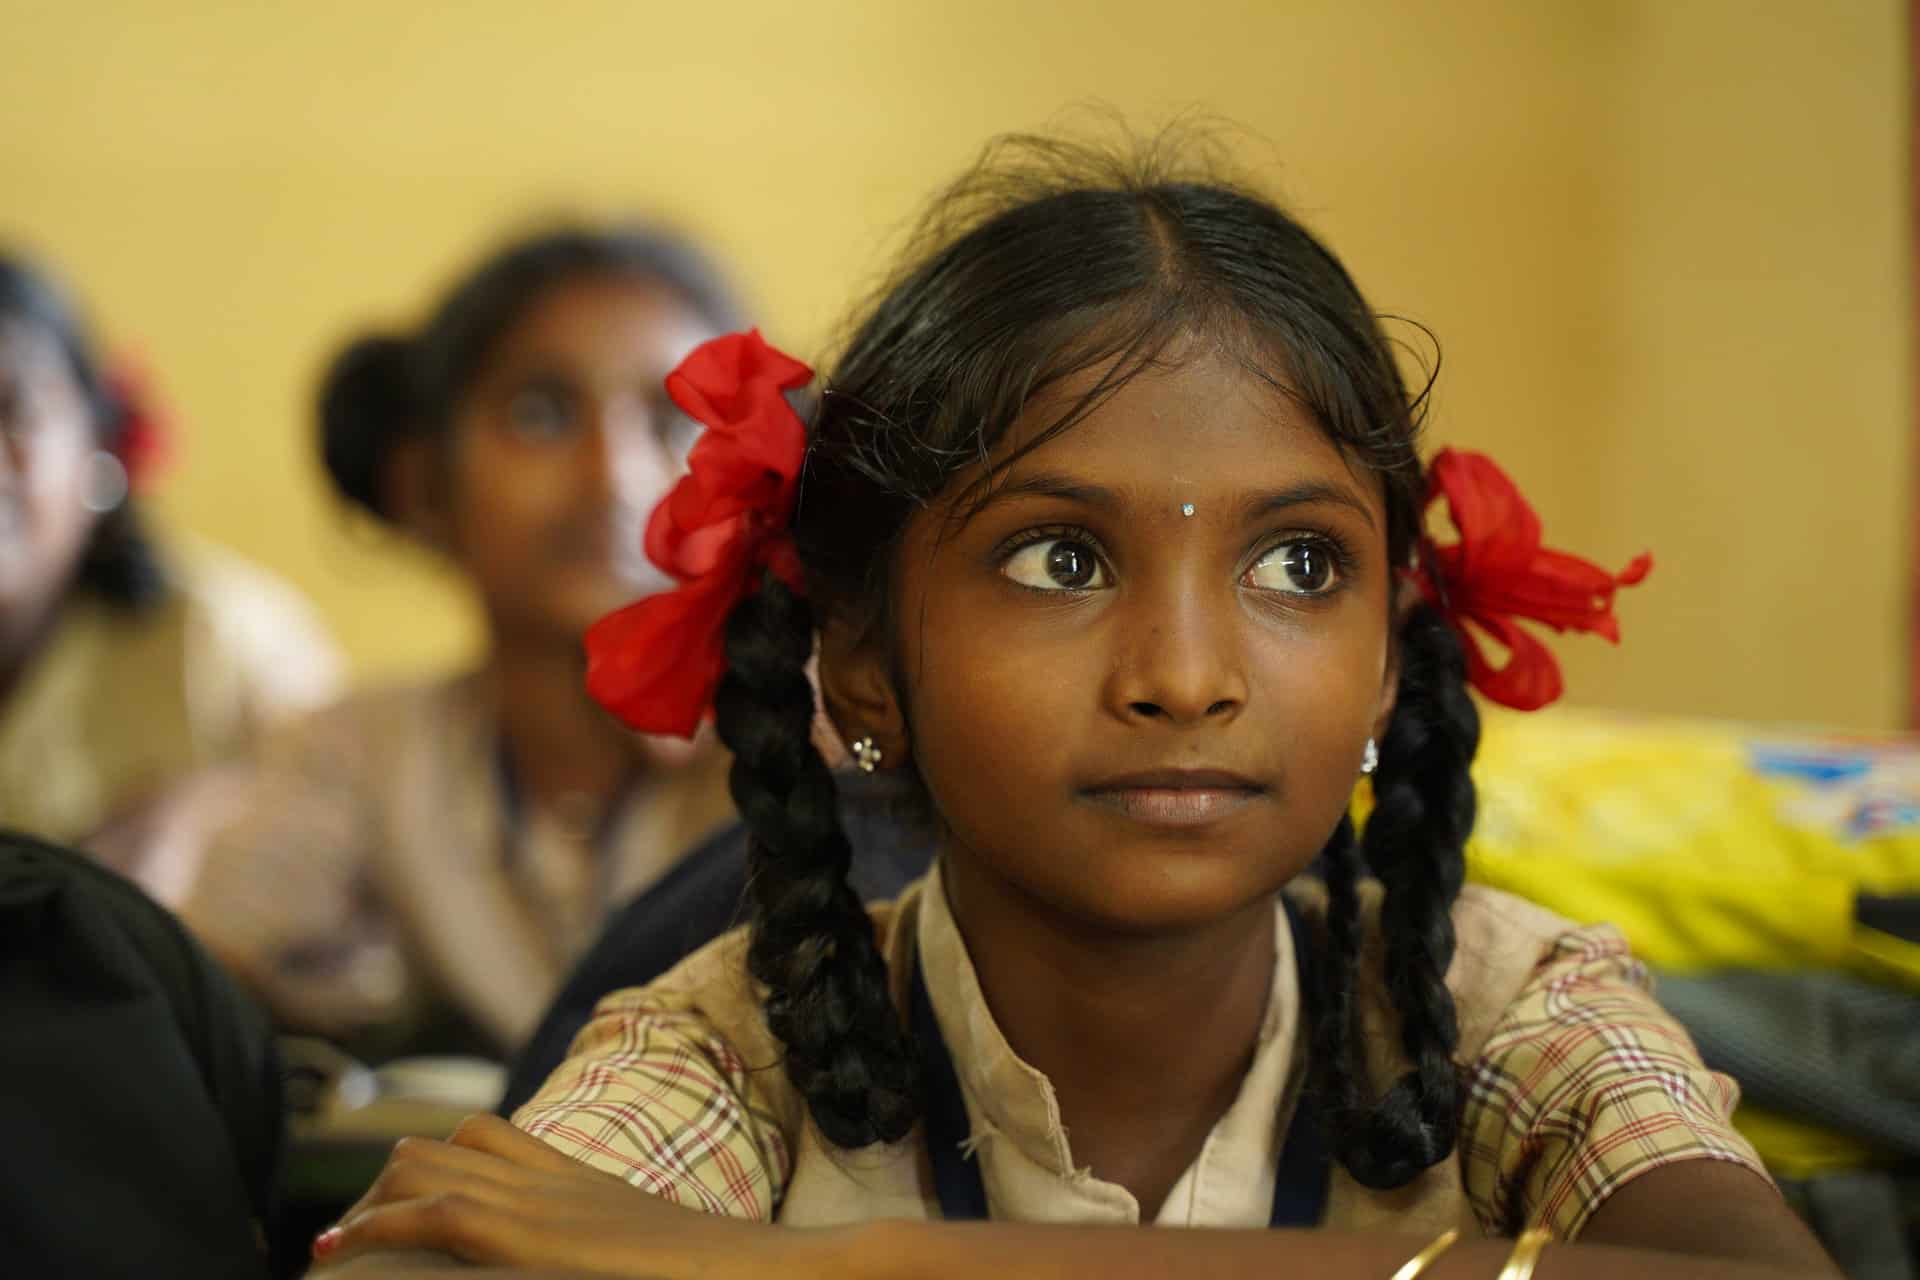 Activities within the framework of the Enlight project in the vicinity of Chennai. The project enables girls from the Adi-Dravida (untouchable) caste to access quality education and build a better future. India, October 2022. Gilles Oger